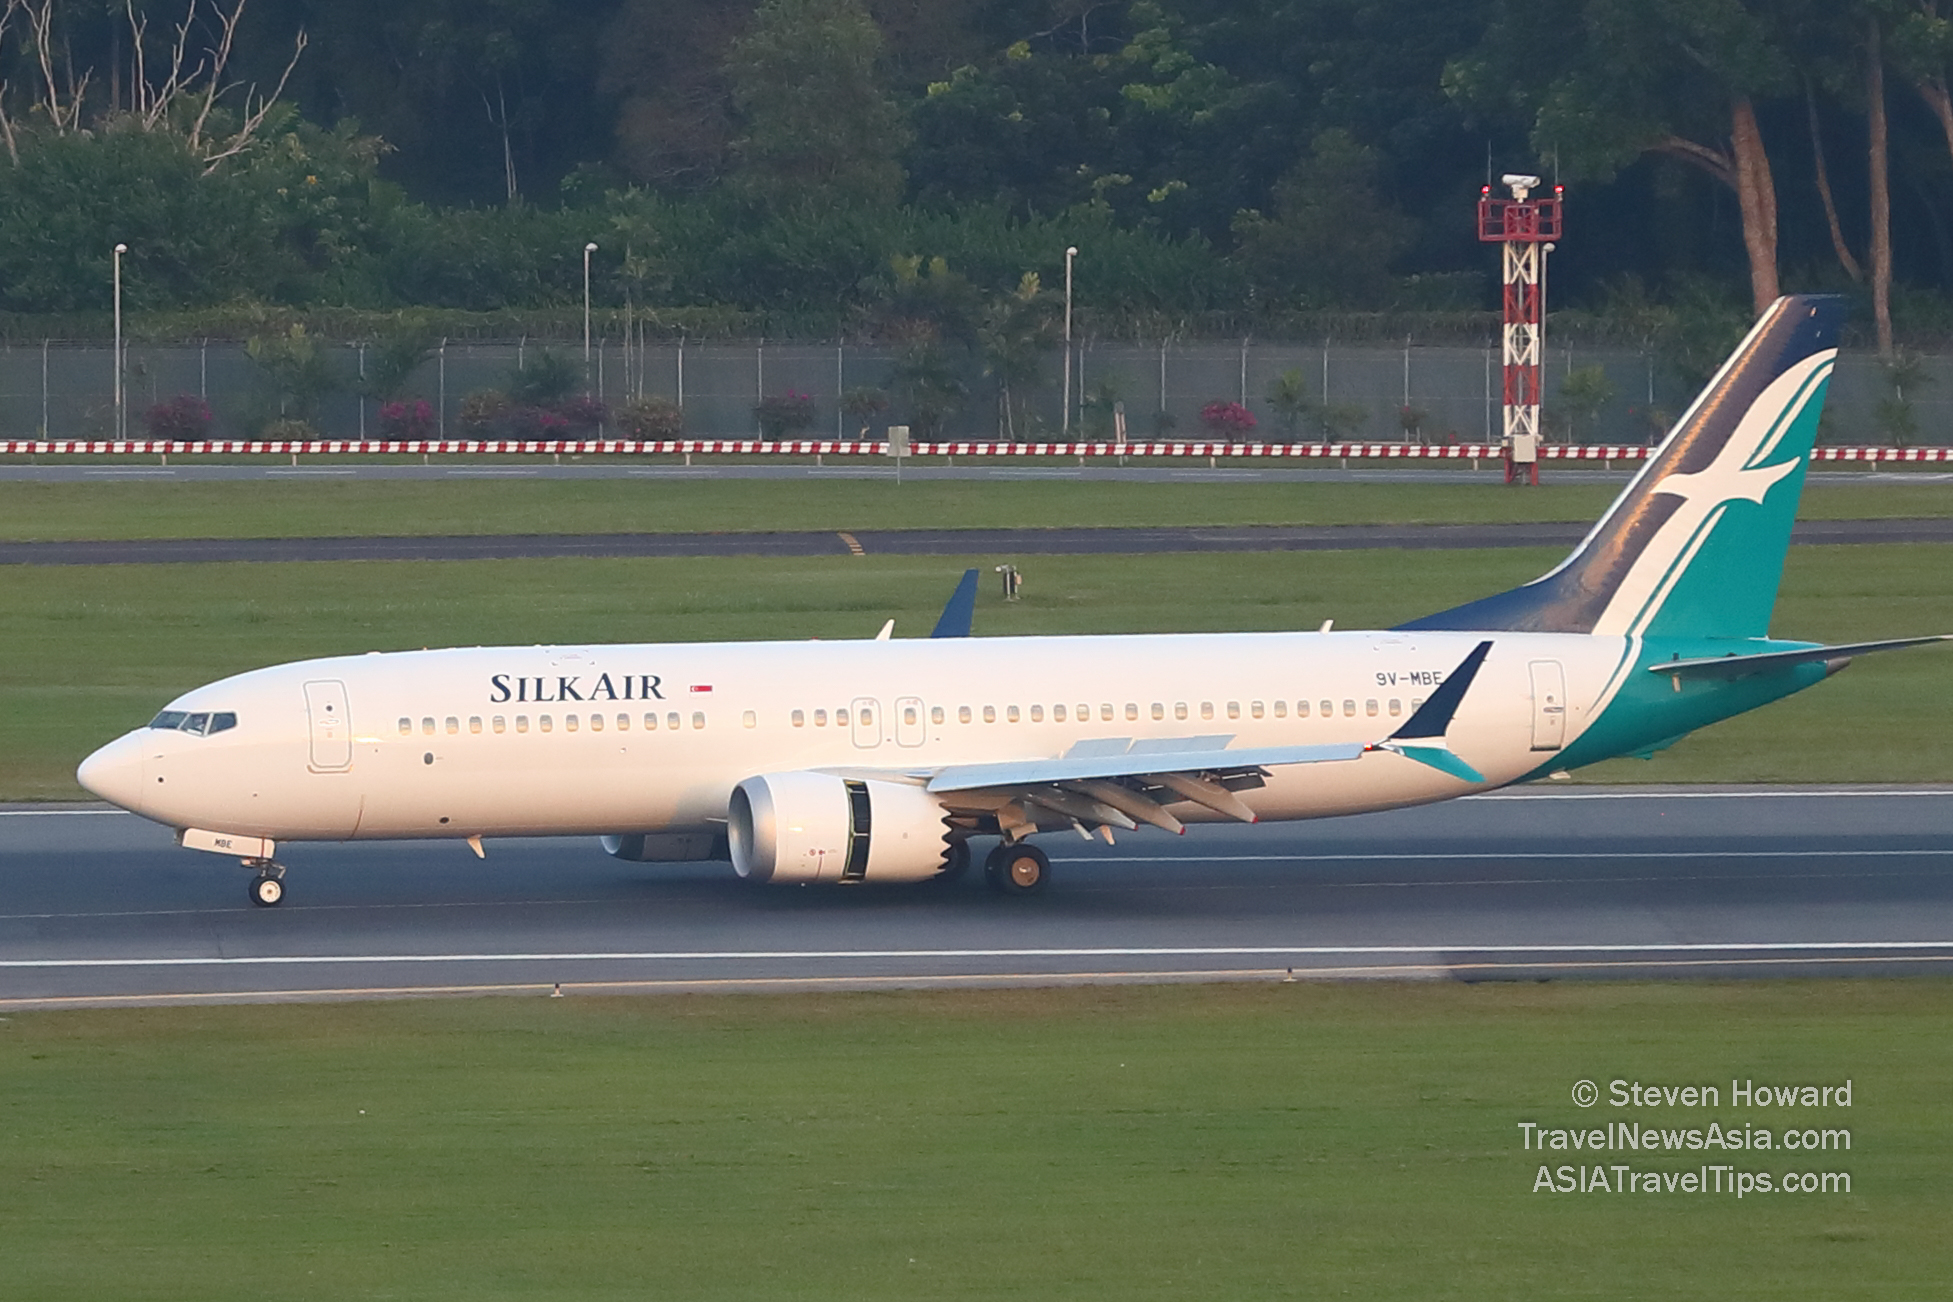 SilkAir Boeing 737 MAX 8. Picture by Steven Howard of TravelNewsAsia.com Click to enlarge.